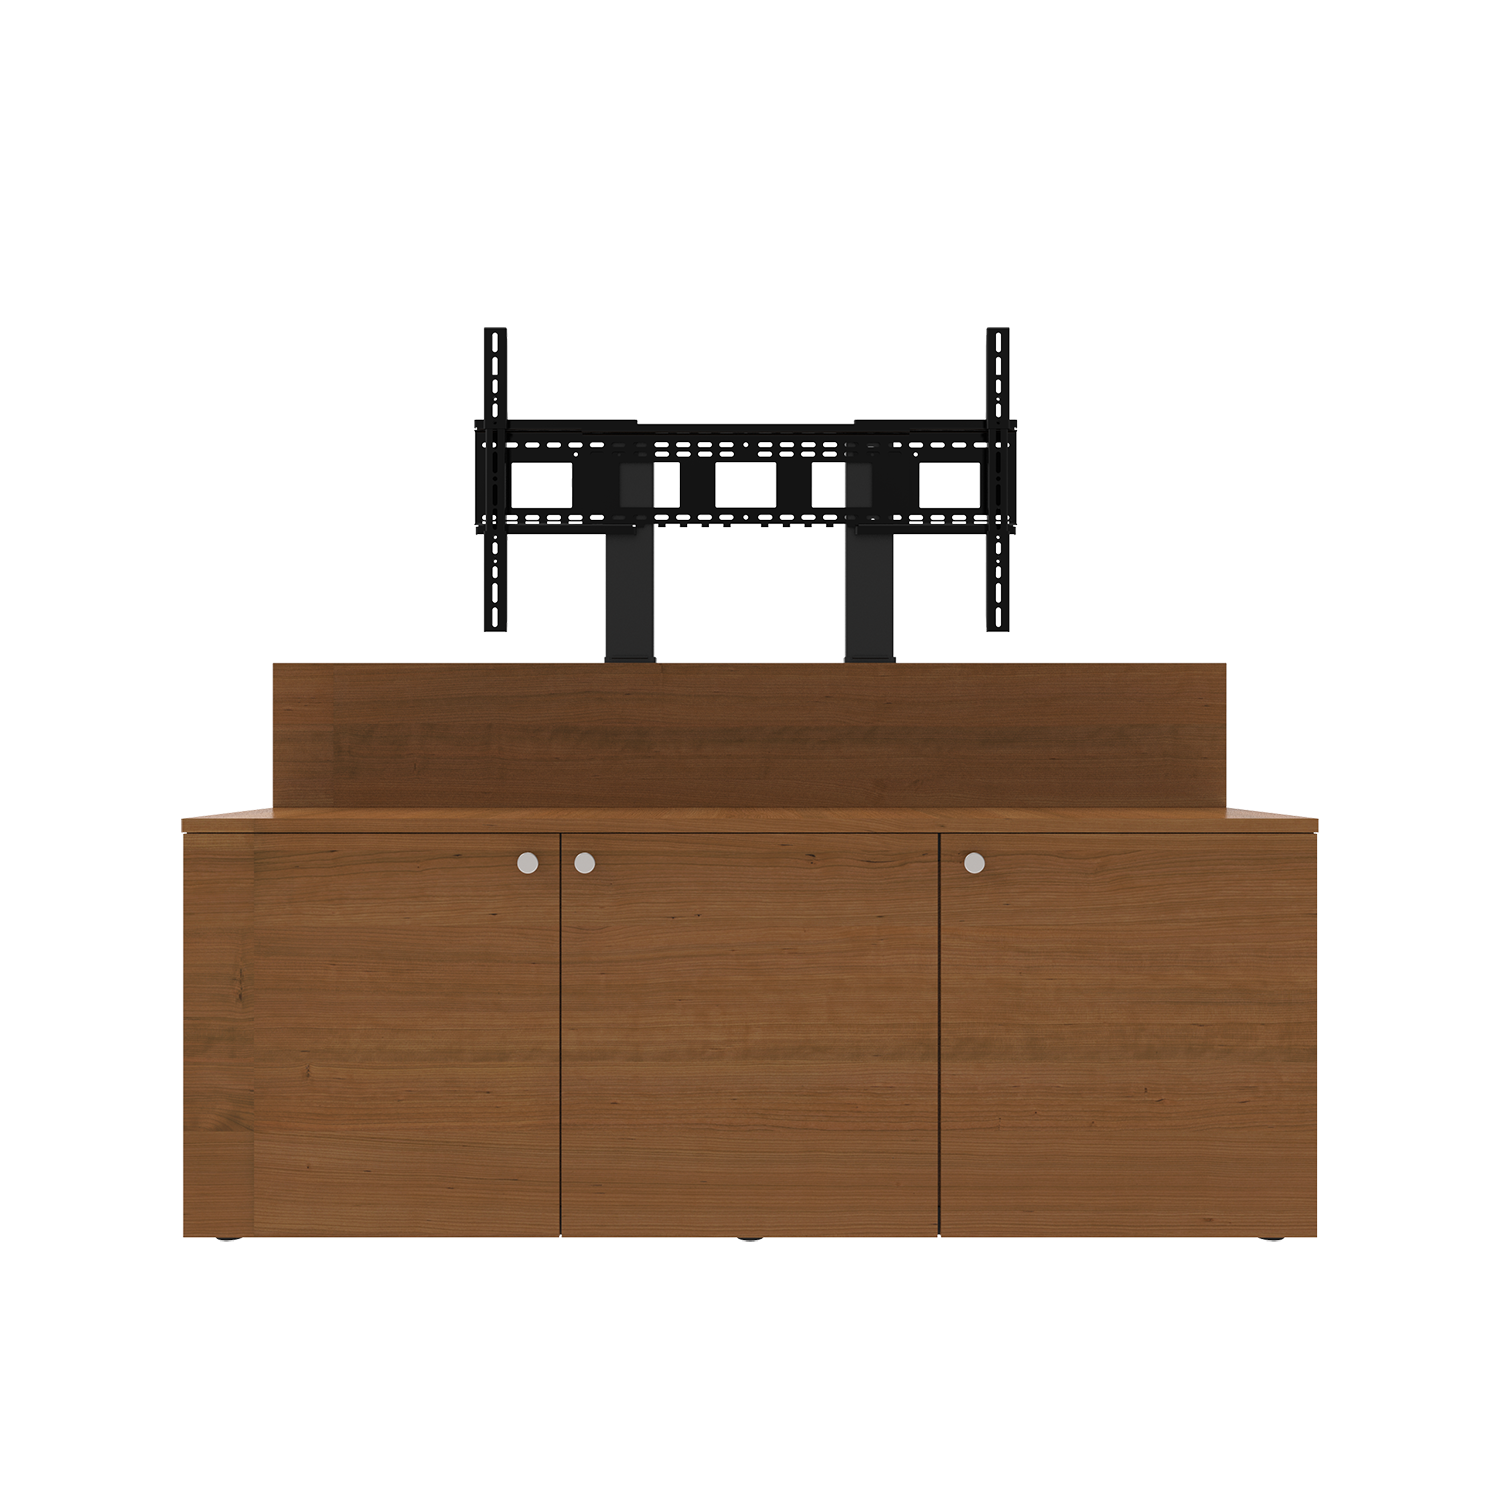 3-Bay Credenza with modesty panel and UM-1 Mount front view